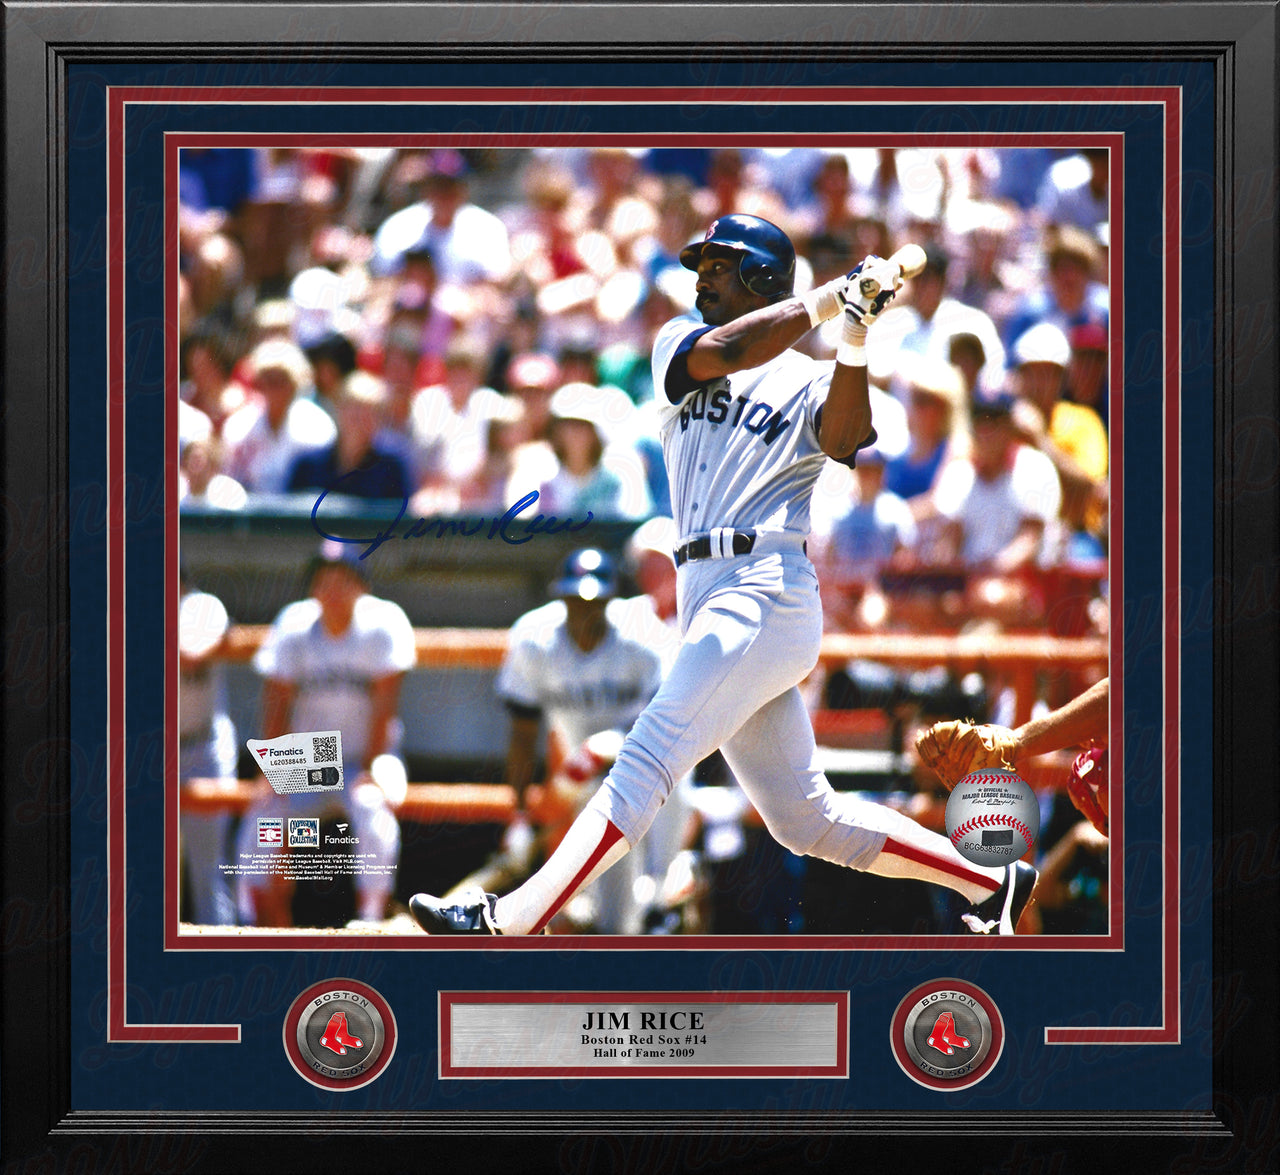 Jim Rice Swinging Action Boston Red Sox Autographed 11" x 14" Framed Baseball Photo - Dynasty Sports & Framing 